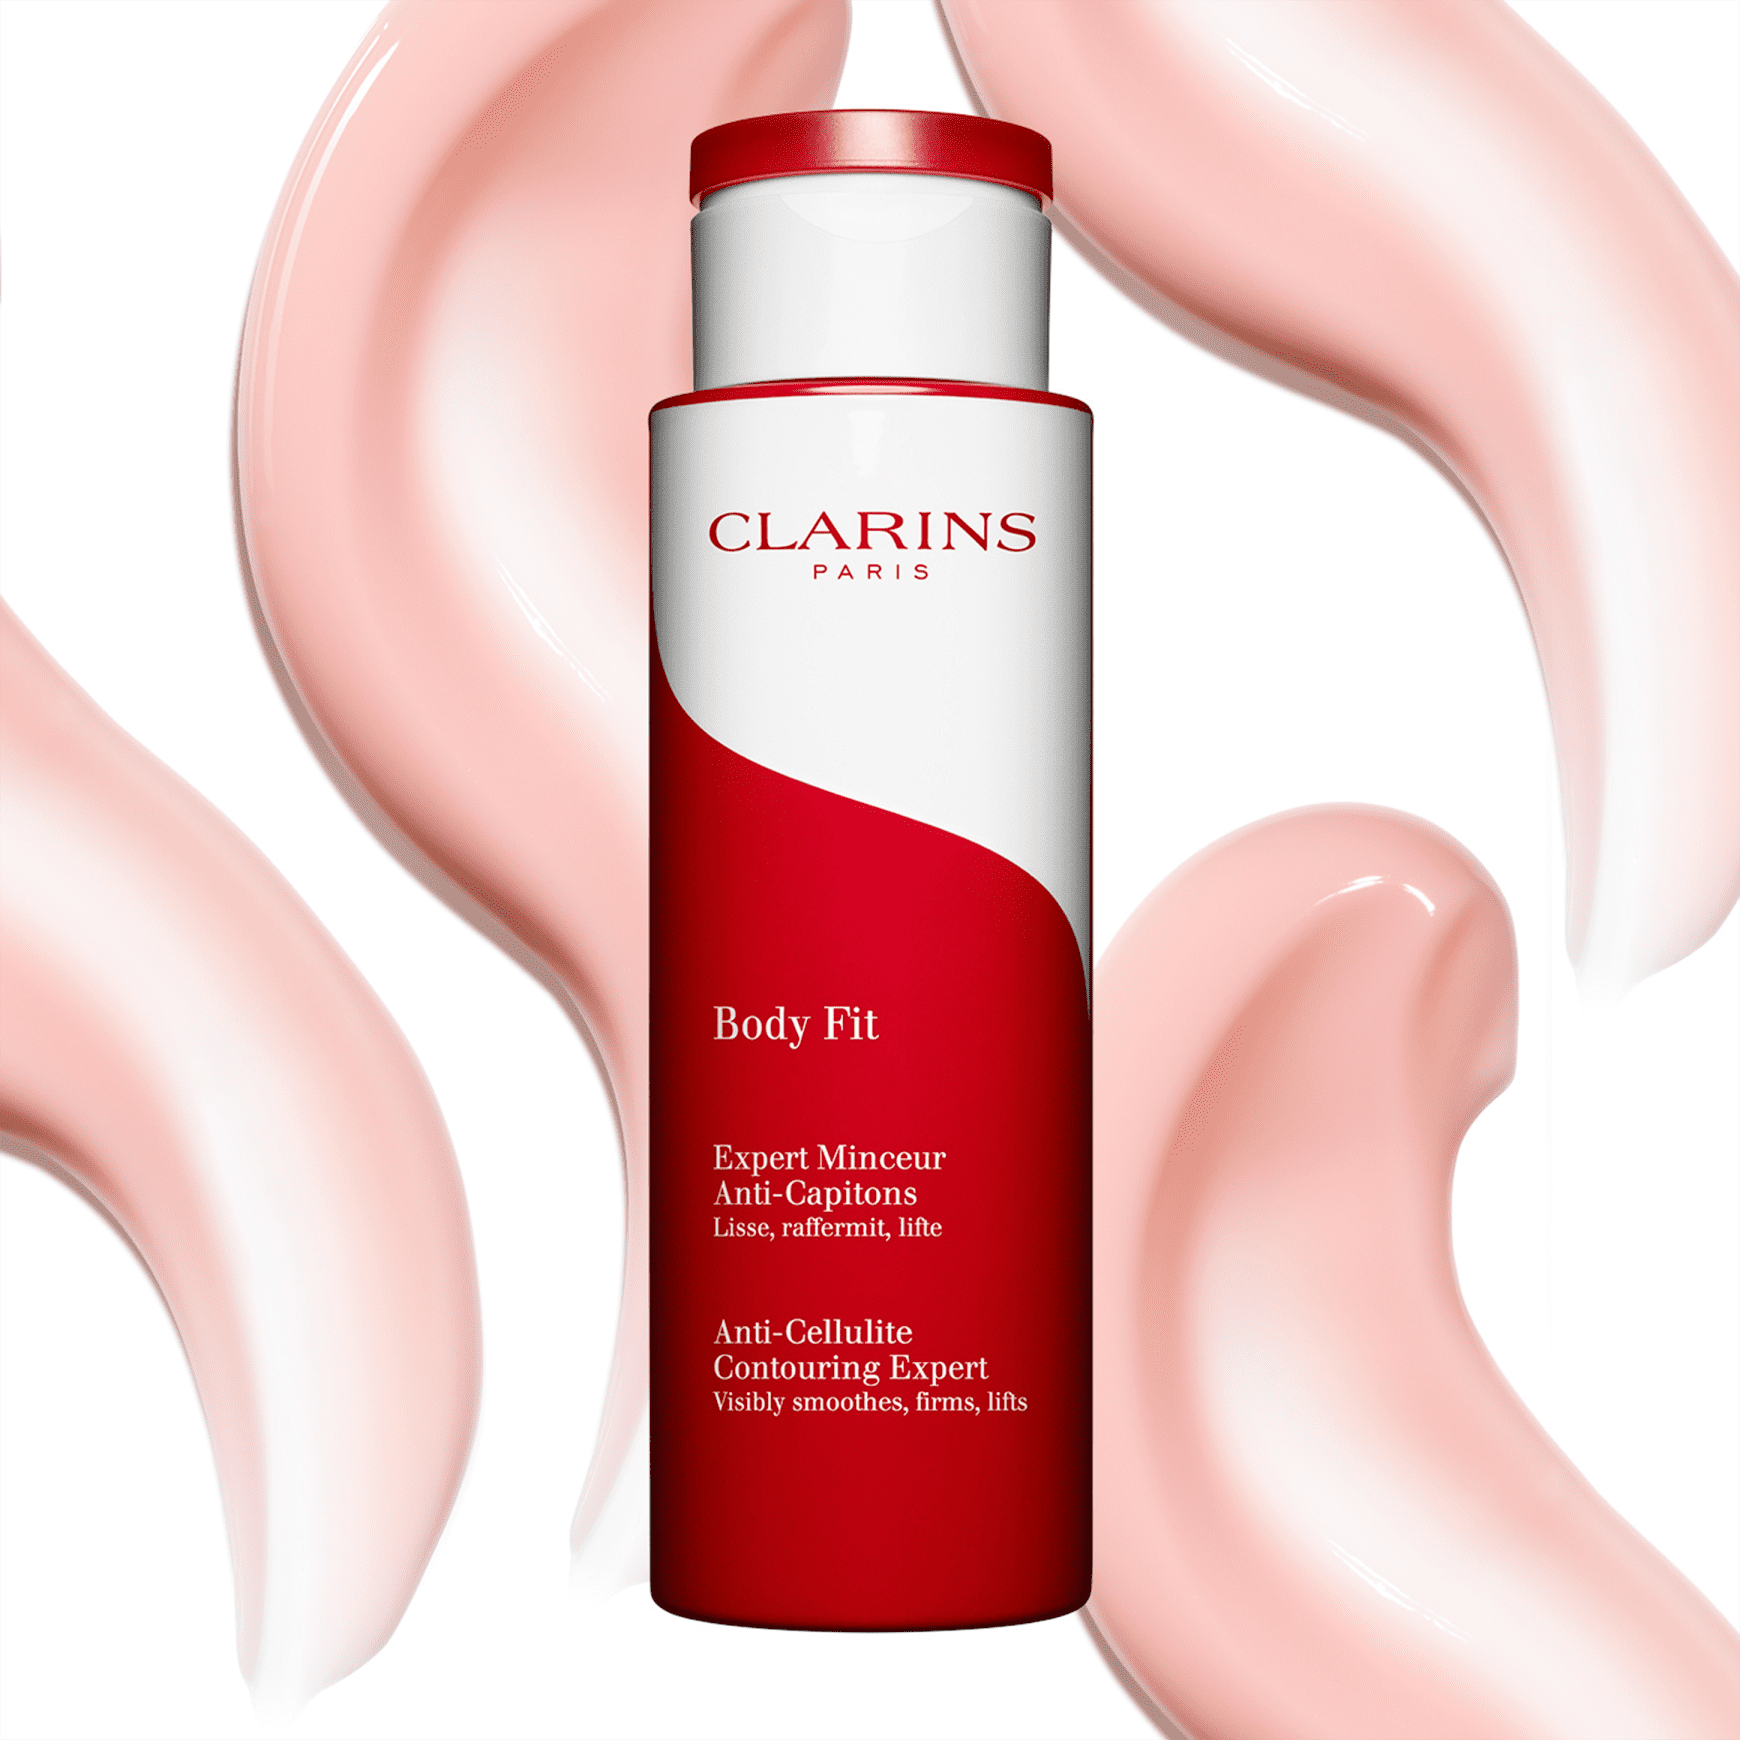 Clarins by Clarins, Body Fit Anti-Cellulite Contouring Expert -400ml/13.3oz